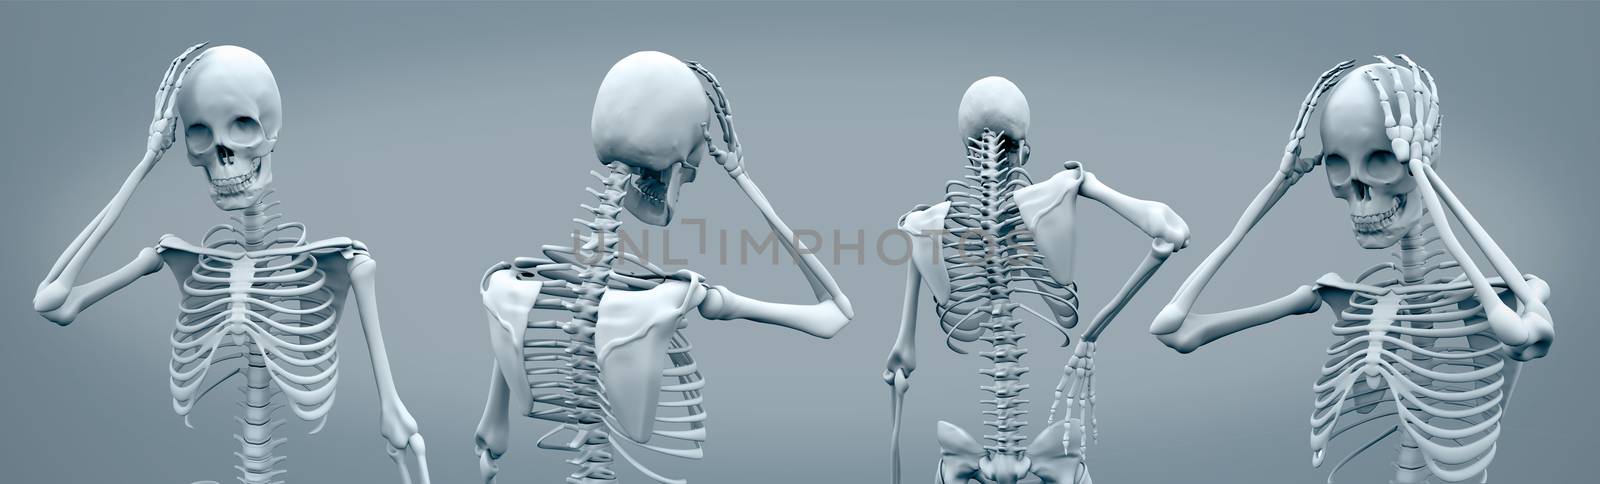 Skeletons having headaches against a grey background